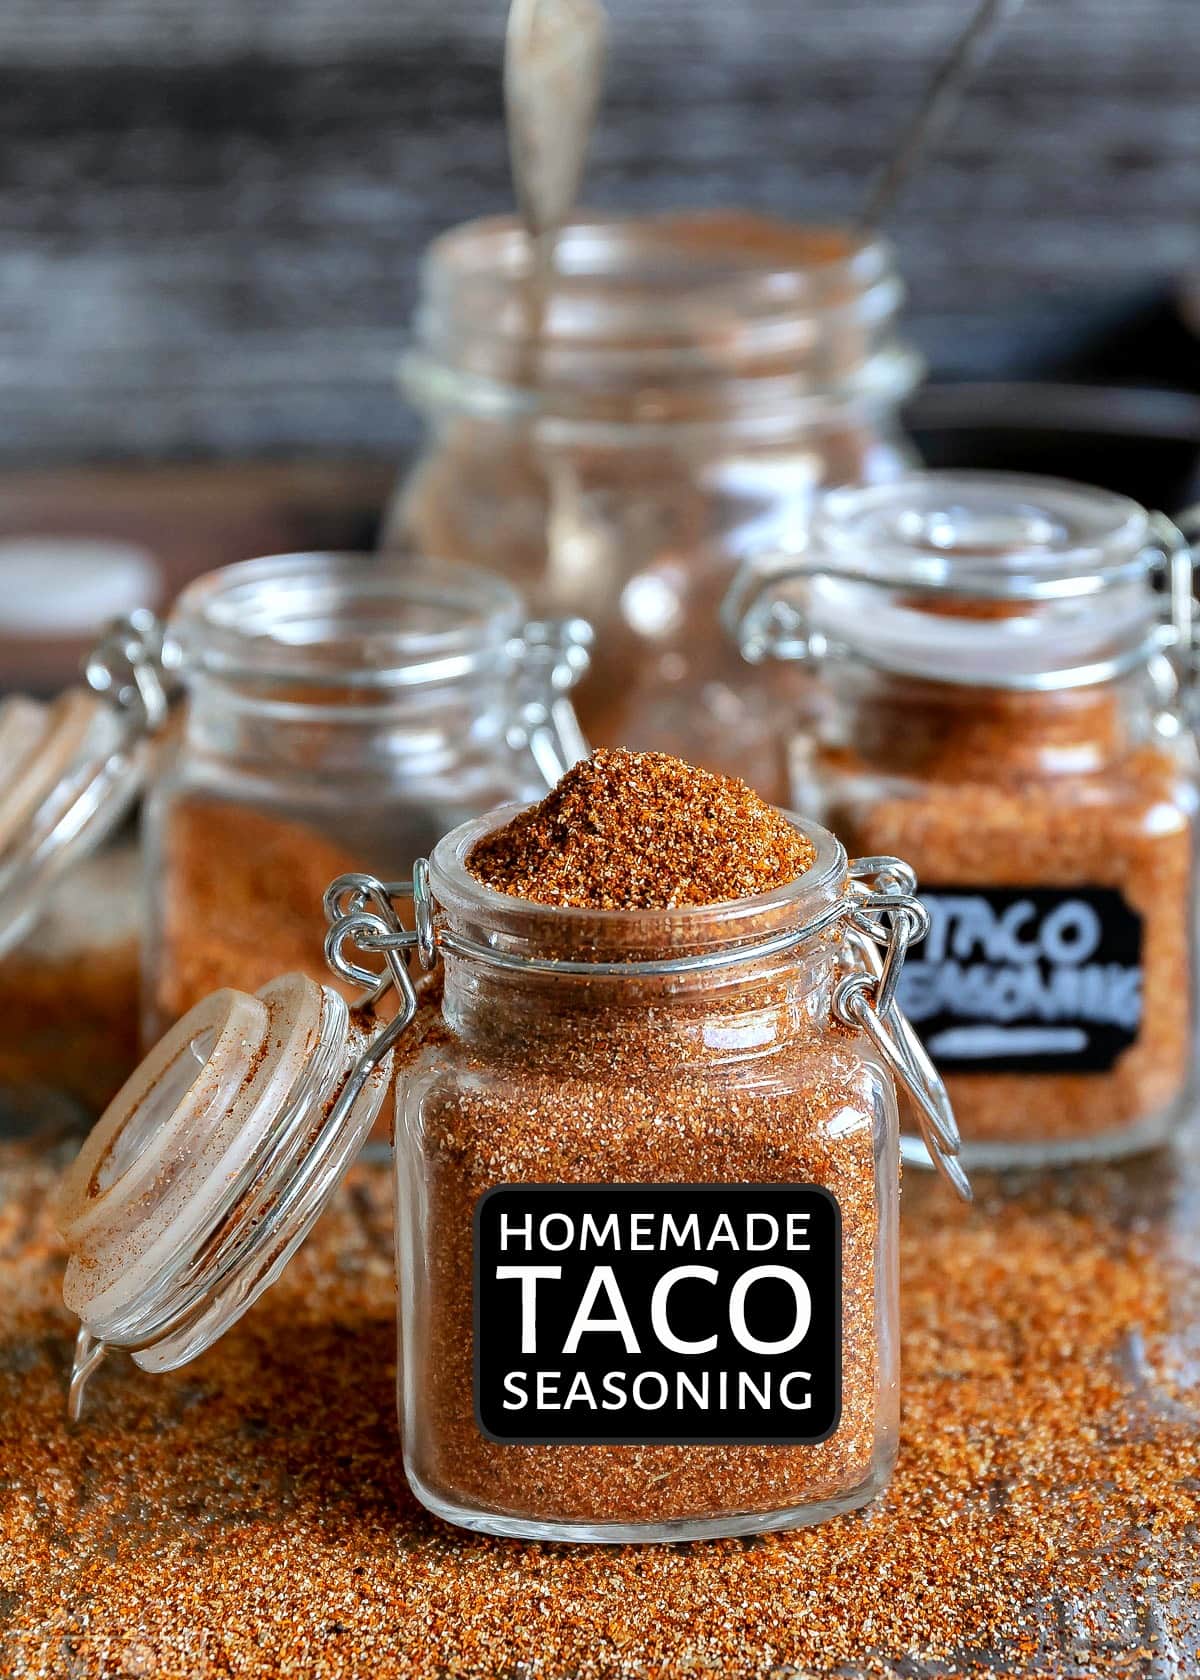 https://www.momontimeout.com/wp-content/uploads/2019/10/homemade-taco-seasoning-recipe-in-spice-jar-with-label.jpg